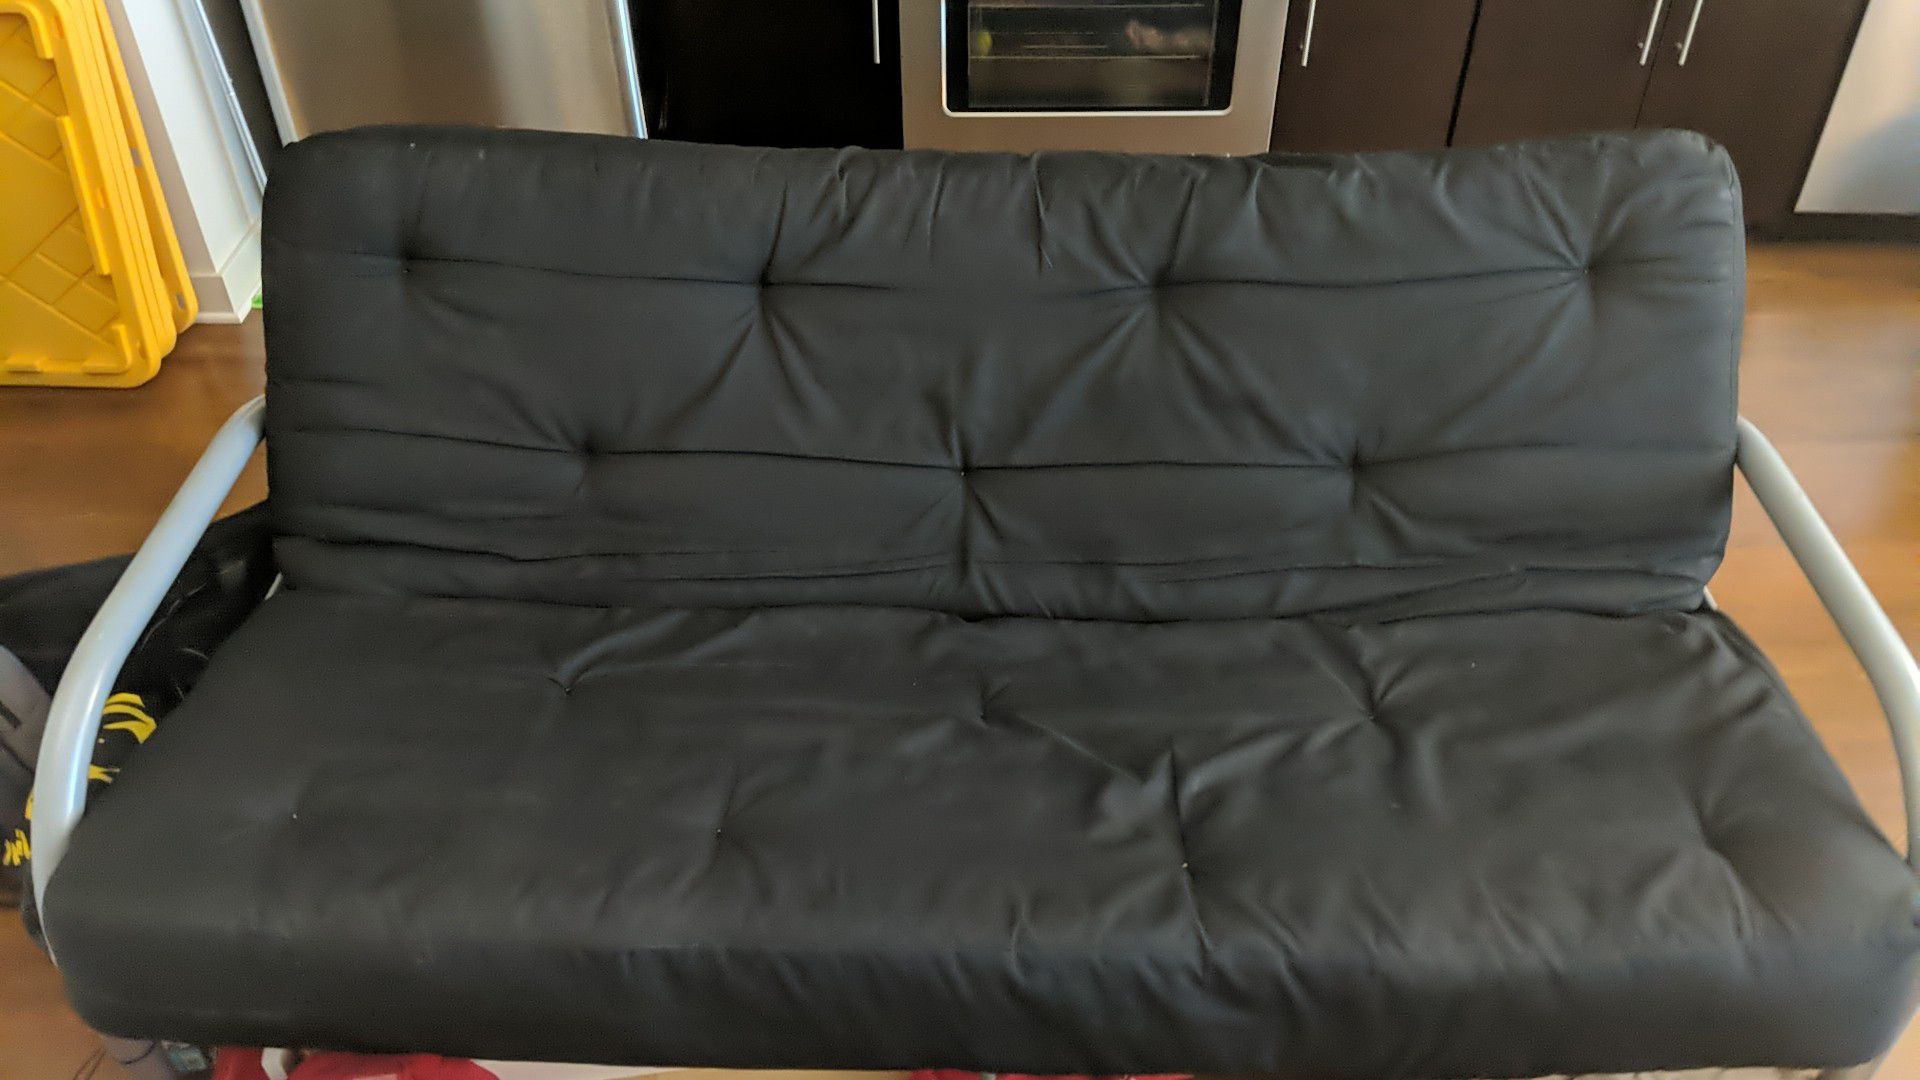 Futon (Grey with 7" black mattress), must buy both, open to offers.